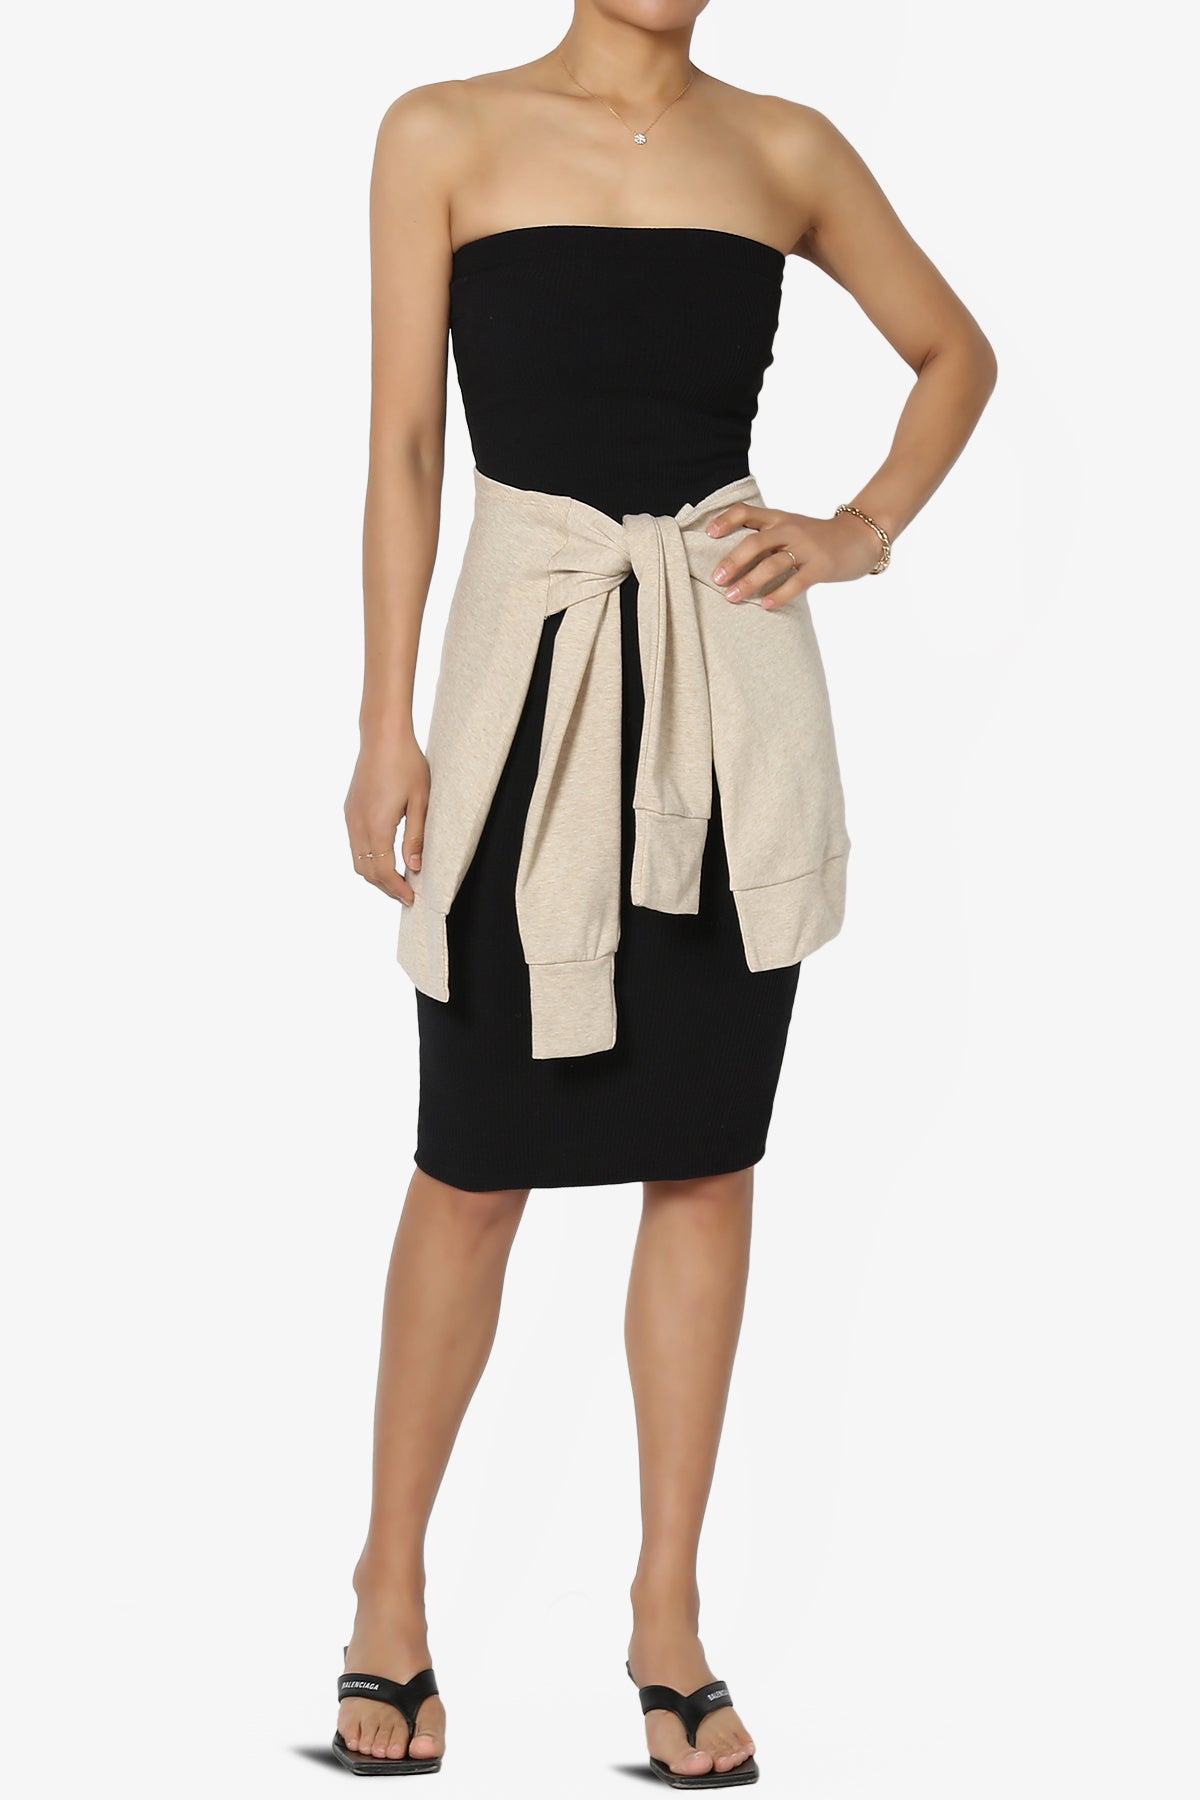 Karrigan Y Zone Hip Cover Up Wrap Skirt OATMEAL_6